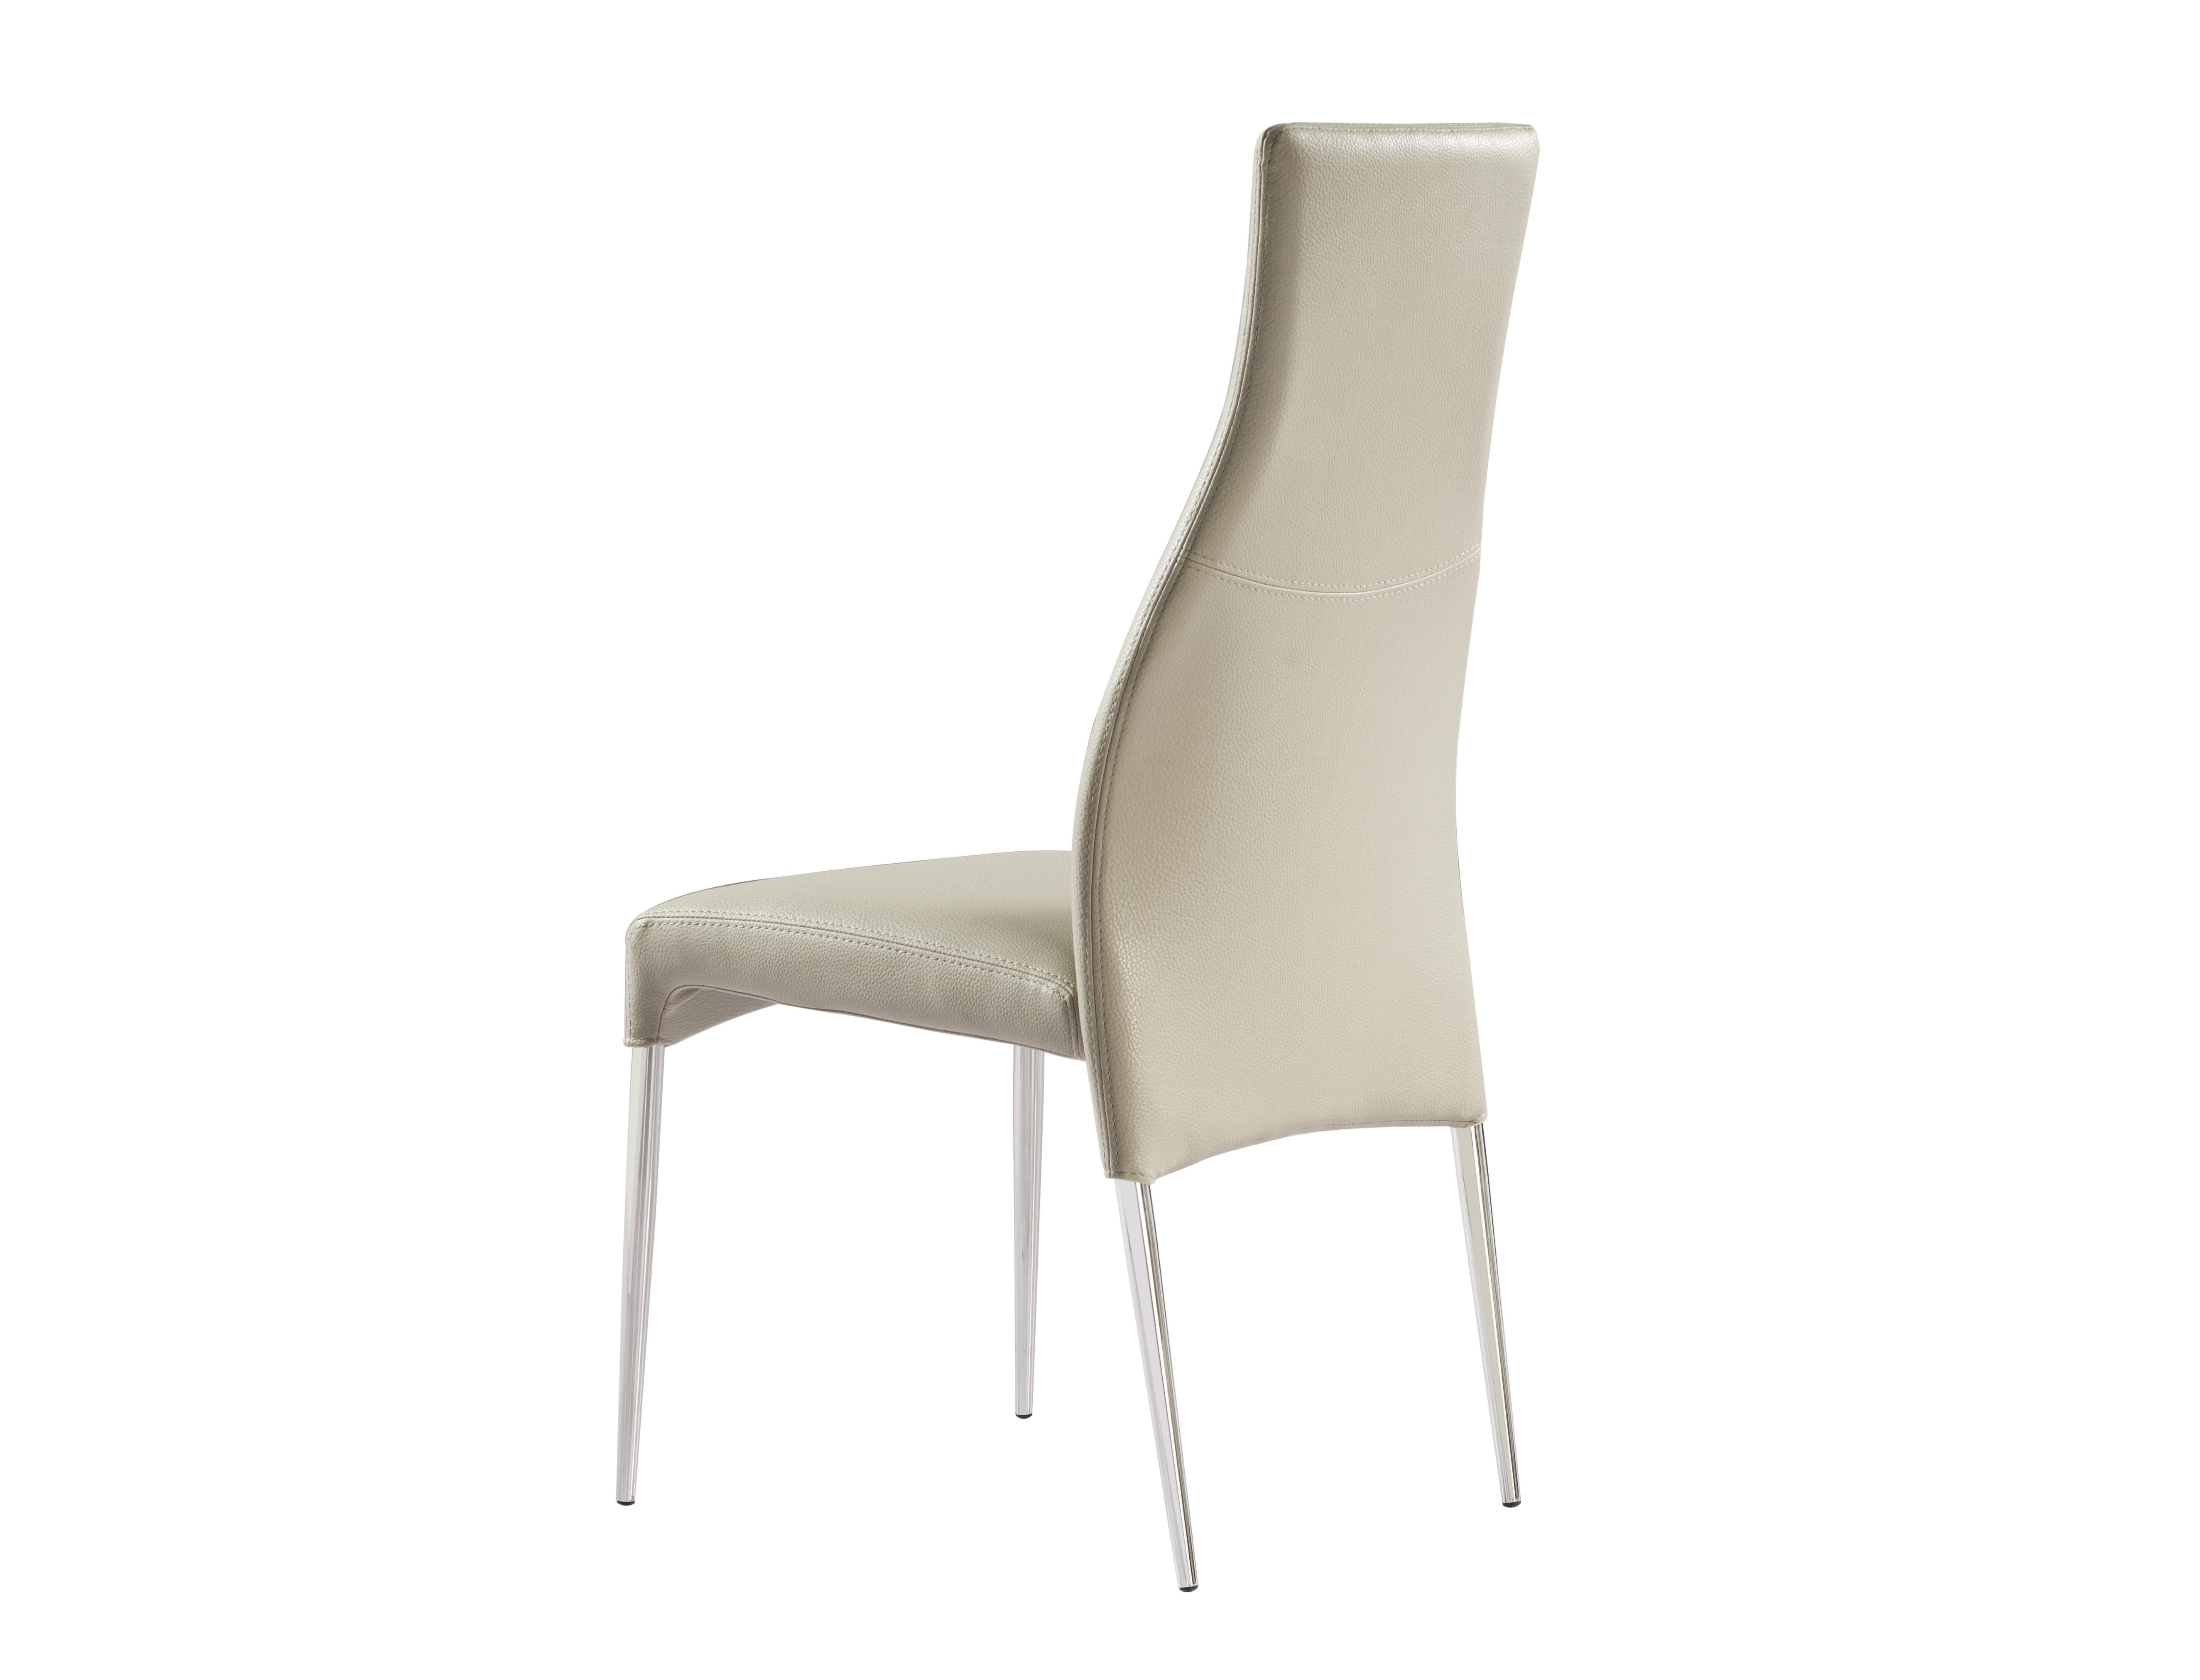 Curtis Dining Chair, taupe faux leather, polished stainless steel legs Dining Chairs With Stainless Steel Legs